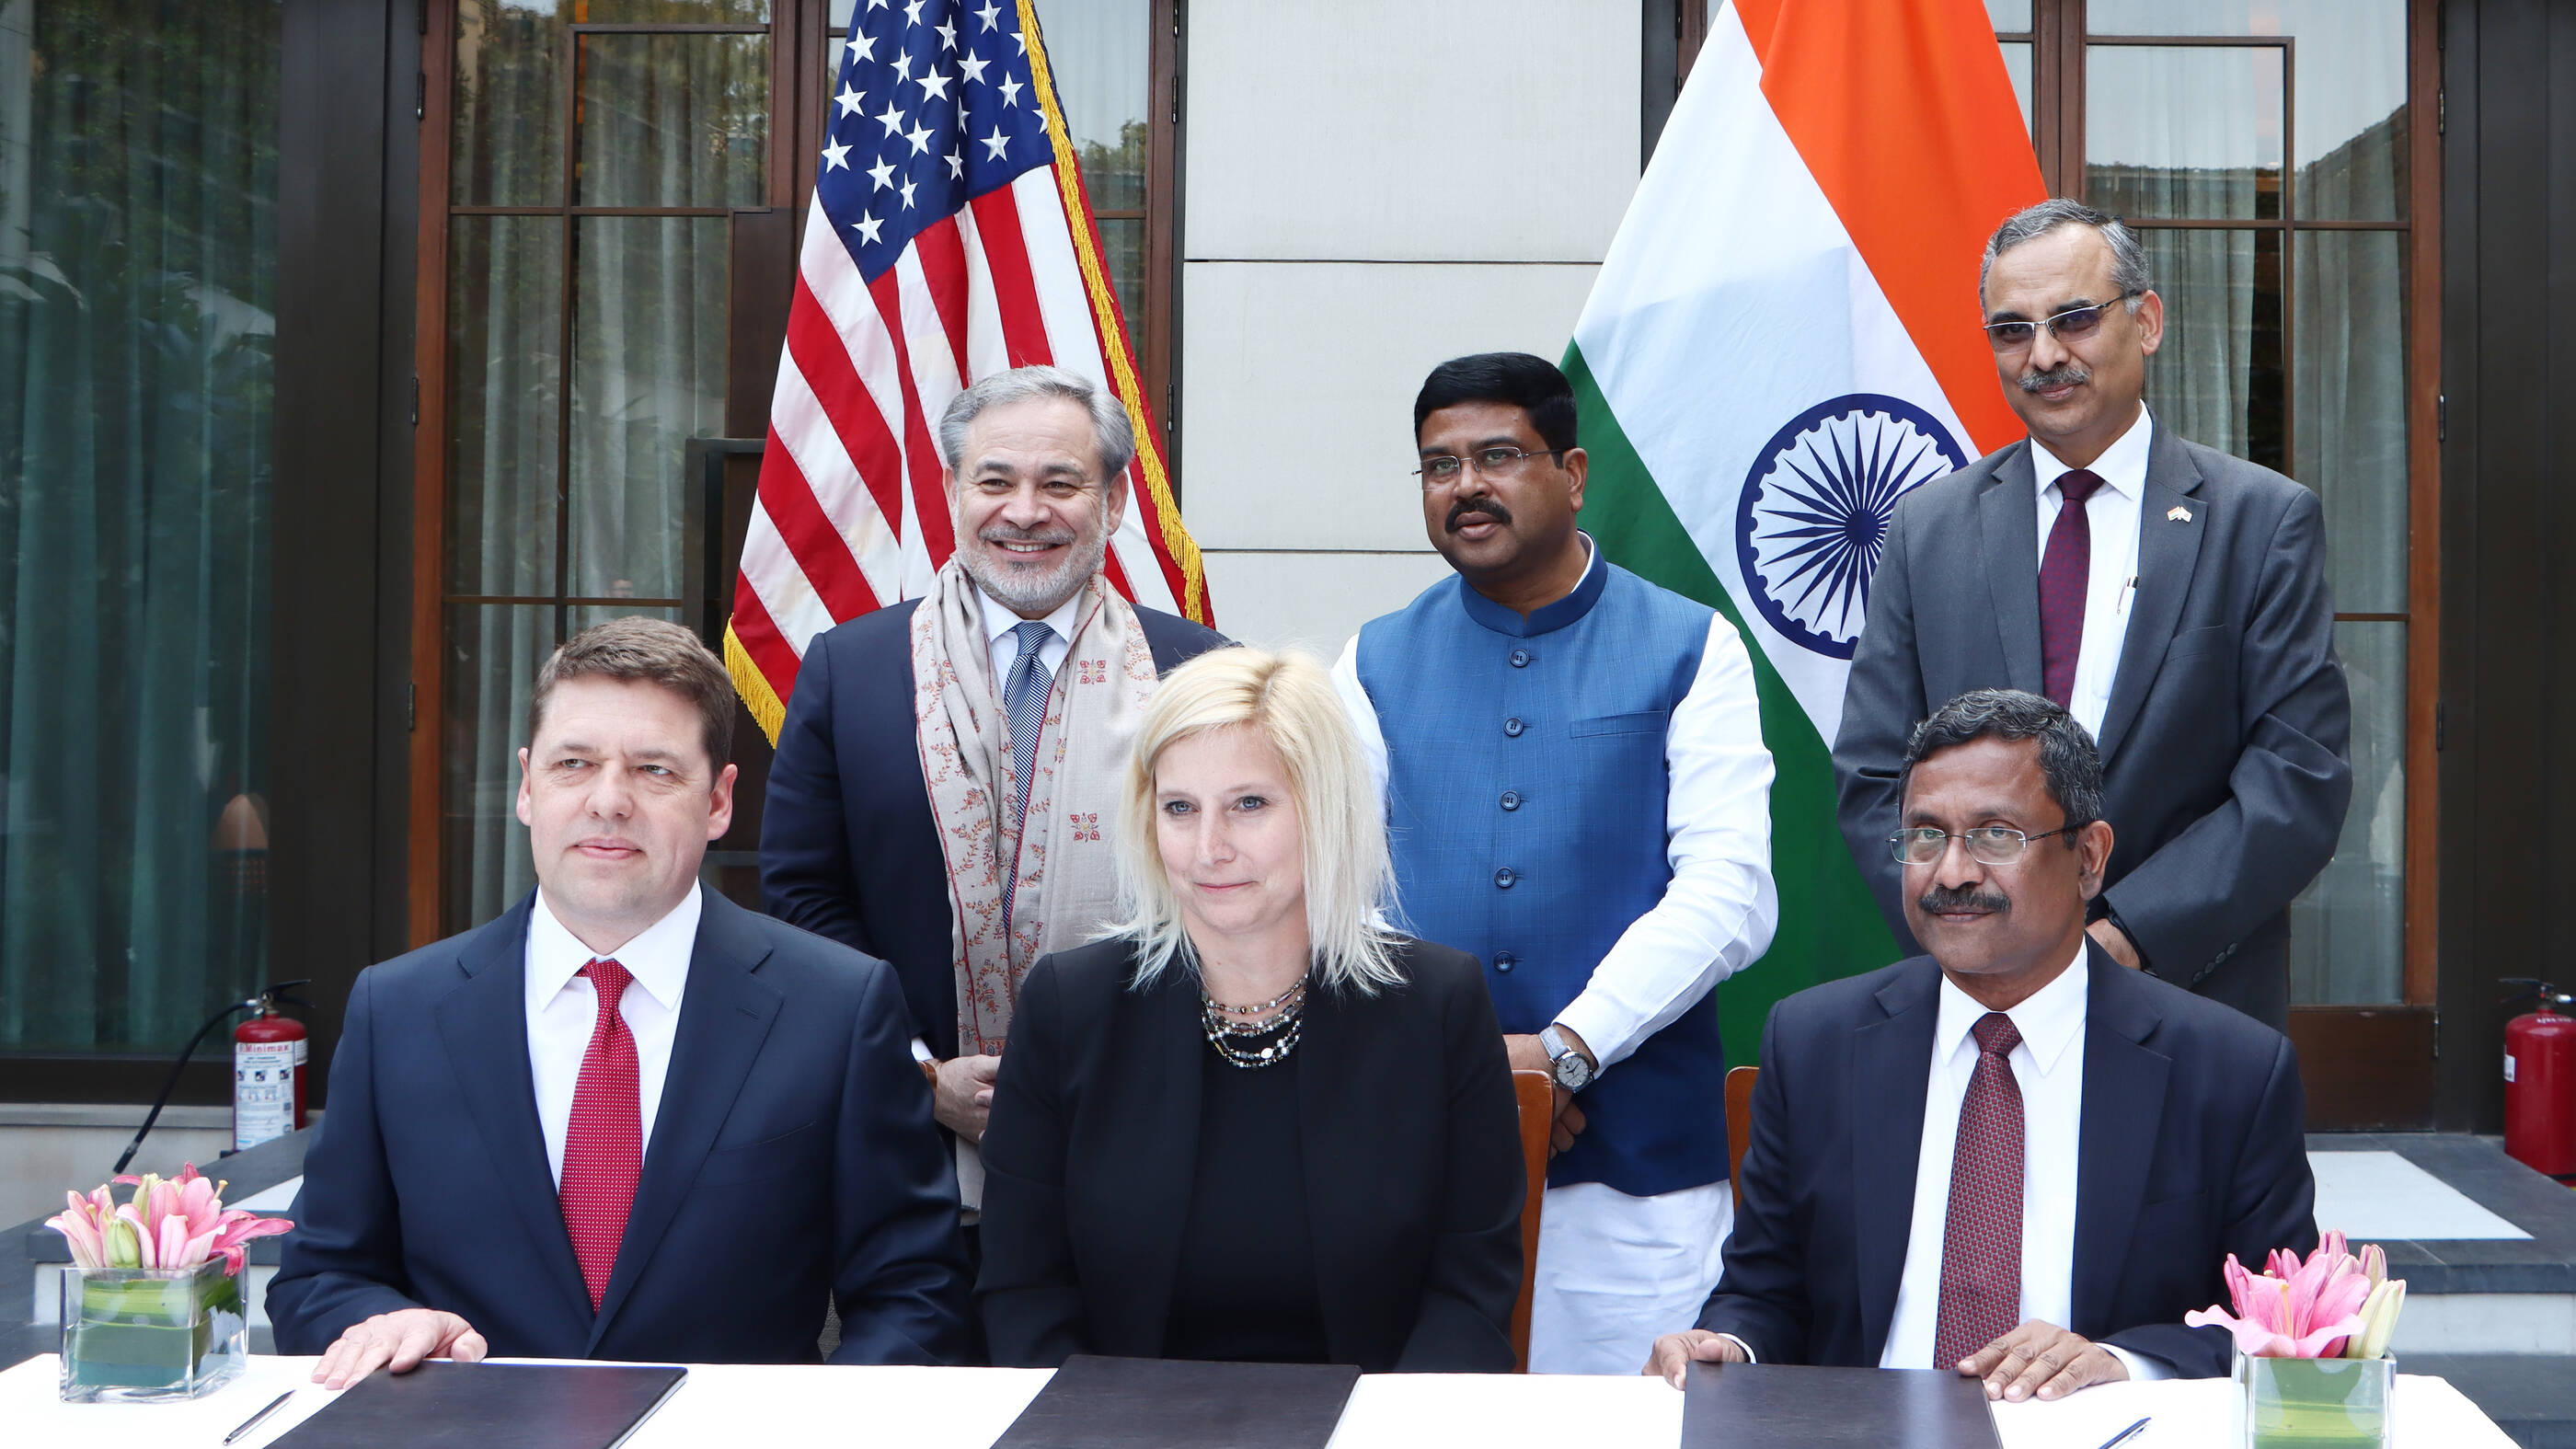 Seated (left to right): Alex Volkov, Chairman, ExxonMobil LNG Market Development Inc; Jillian Evanko, CEO, Chart Industries, Inc; GK Satish, Director (P&BD), IndianOil
Standing (left to right): US Energy Secretary Dan Brouillette, India’s Minister of Petroleum and Gas Dharmendra Pradhanand IndianOil Chairman Sanjiv Singh